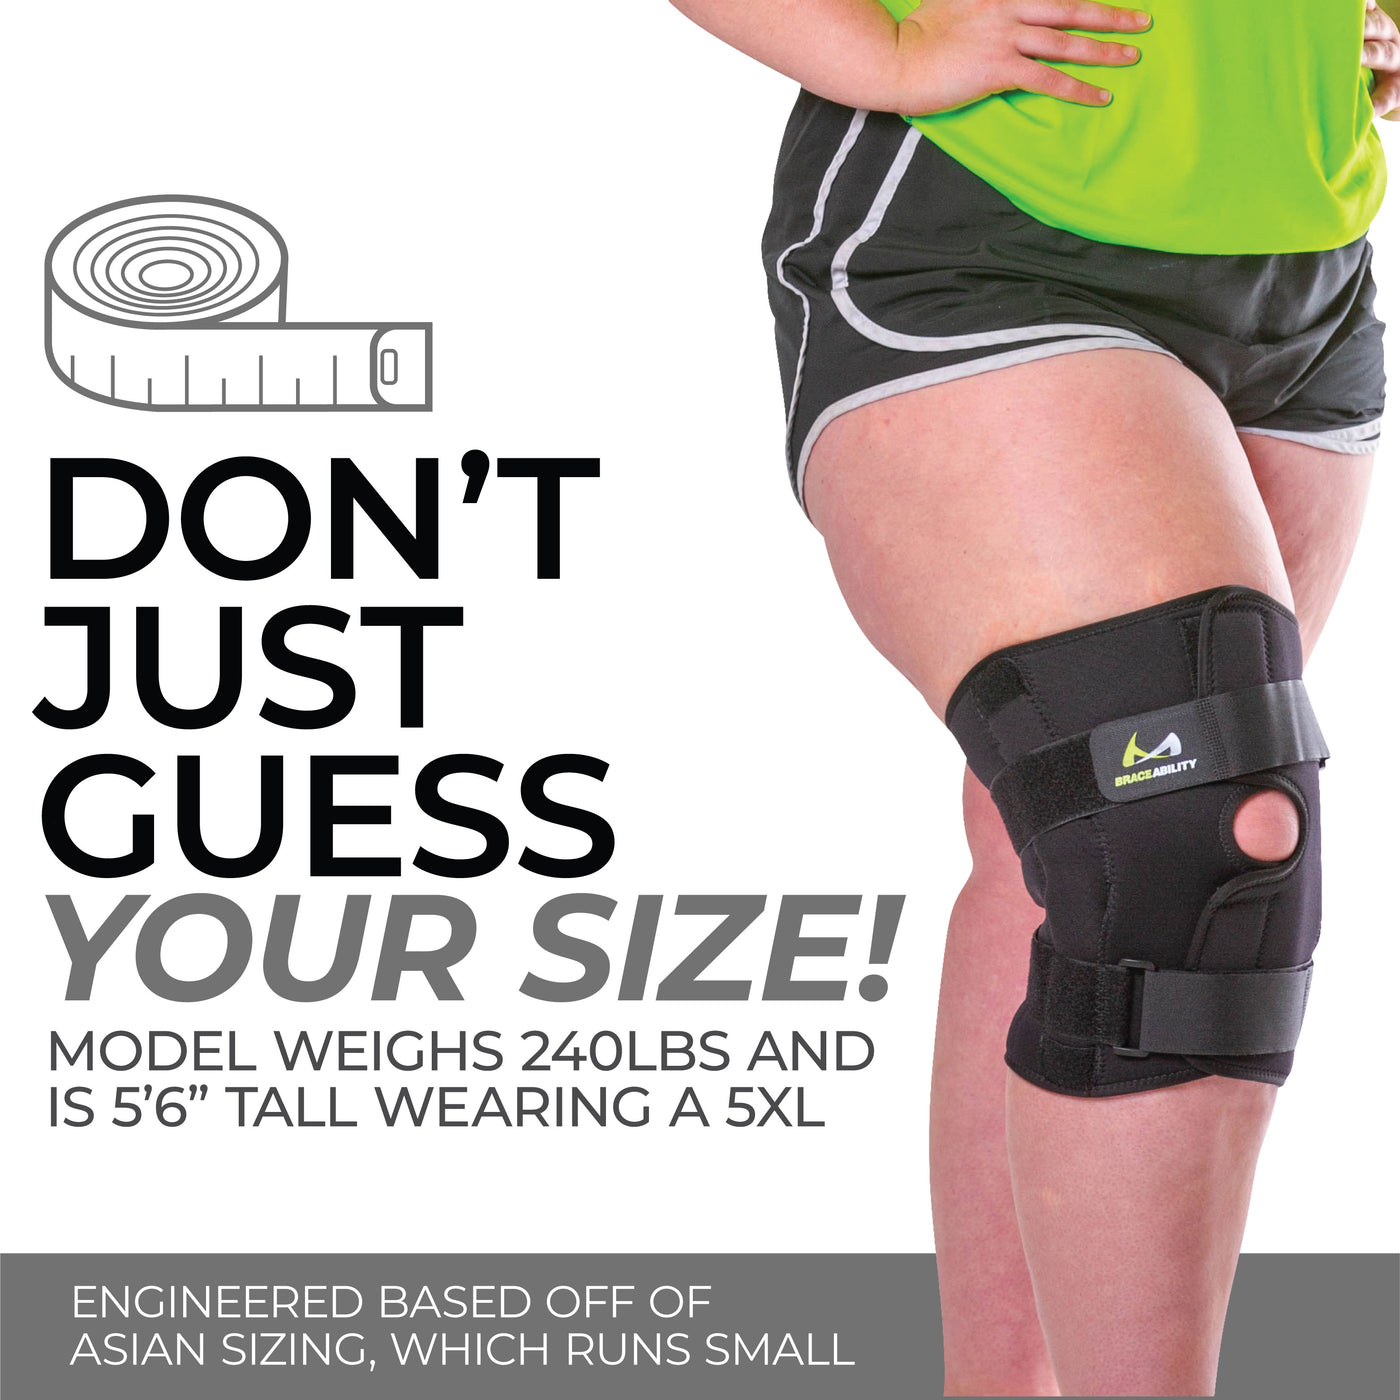 Our knee brace for a meniscus tear runs smaller than a normal brace so make sure to measure